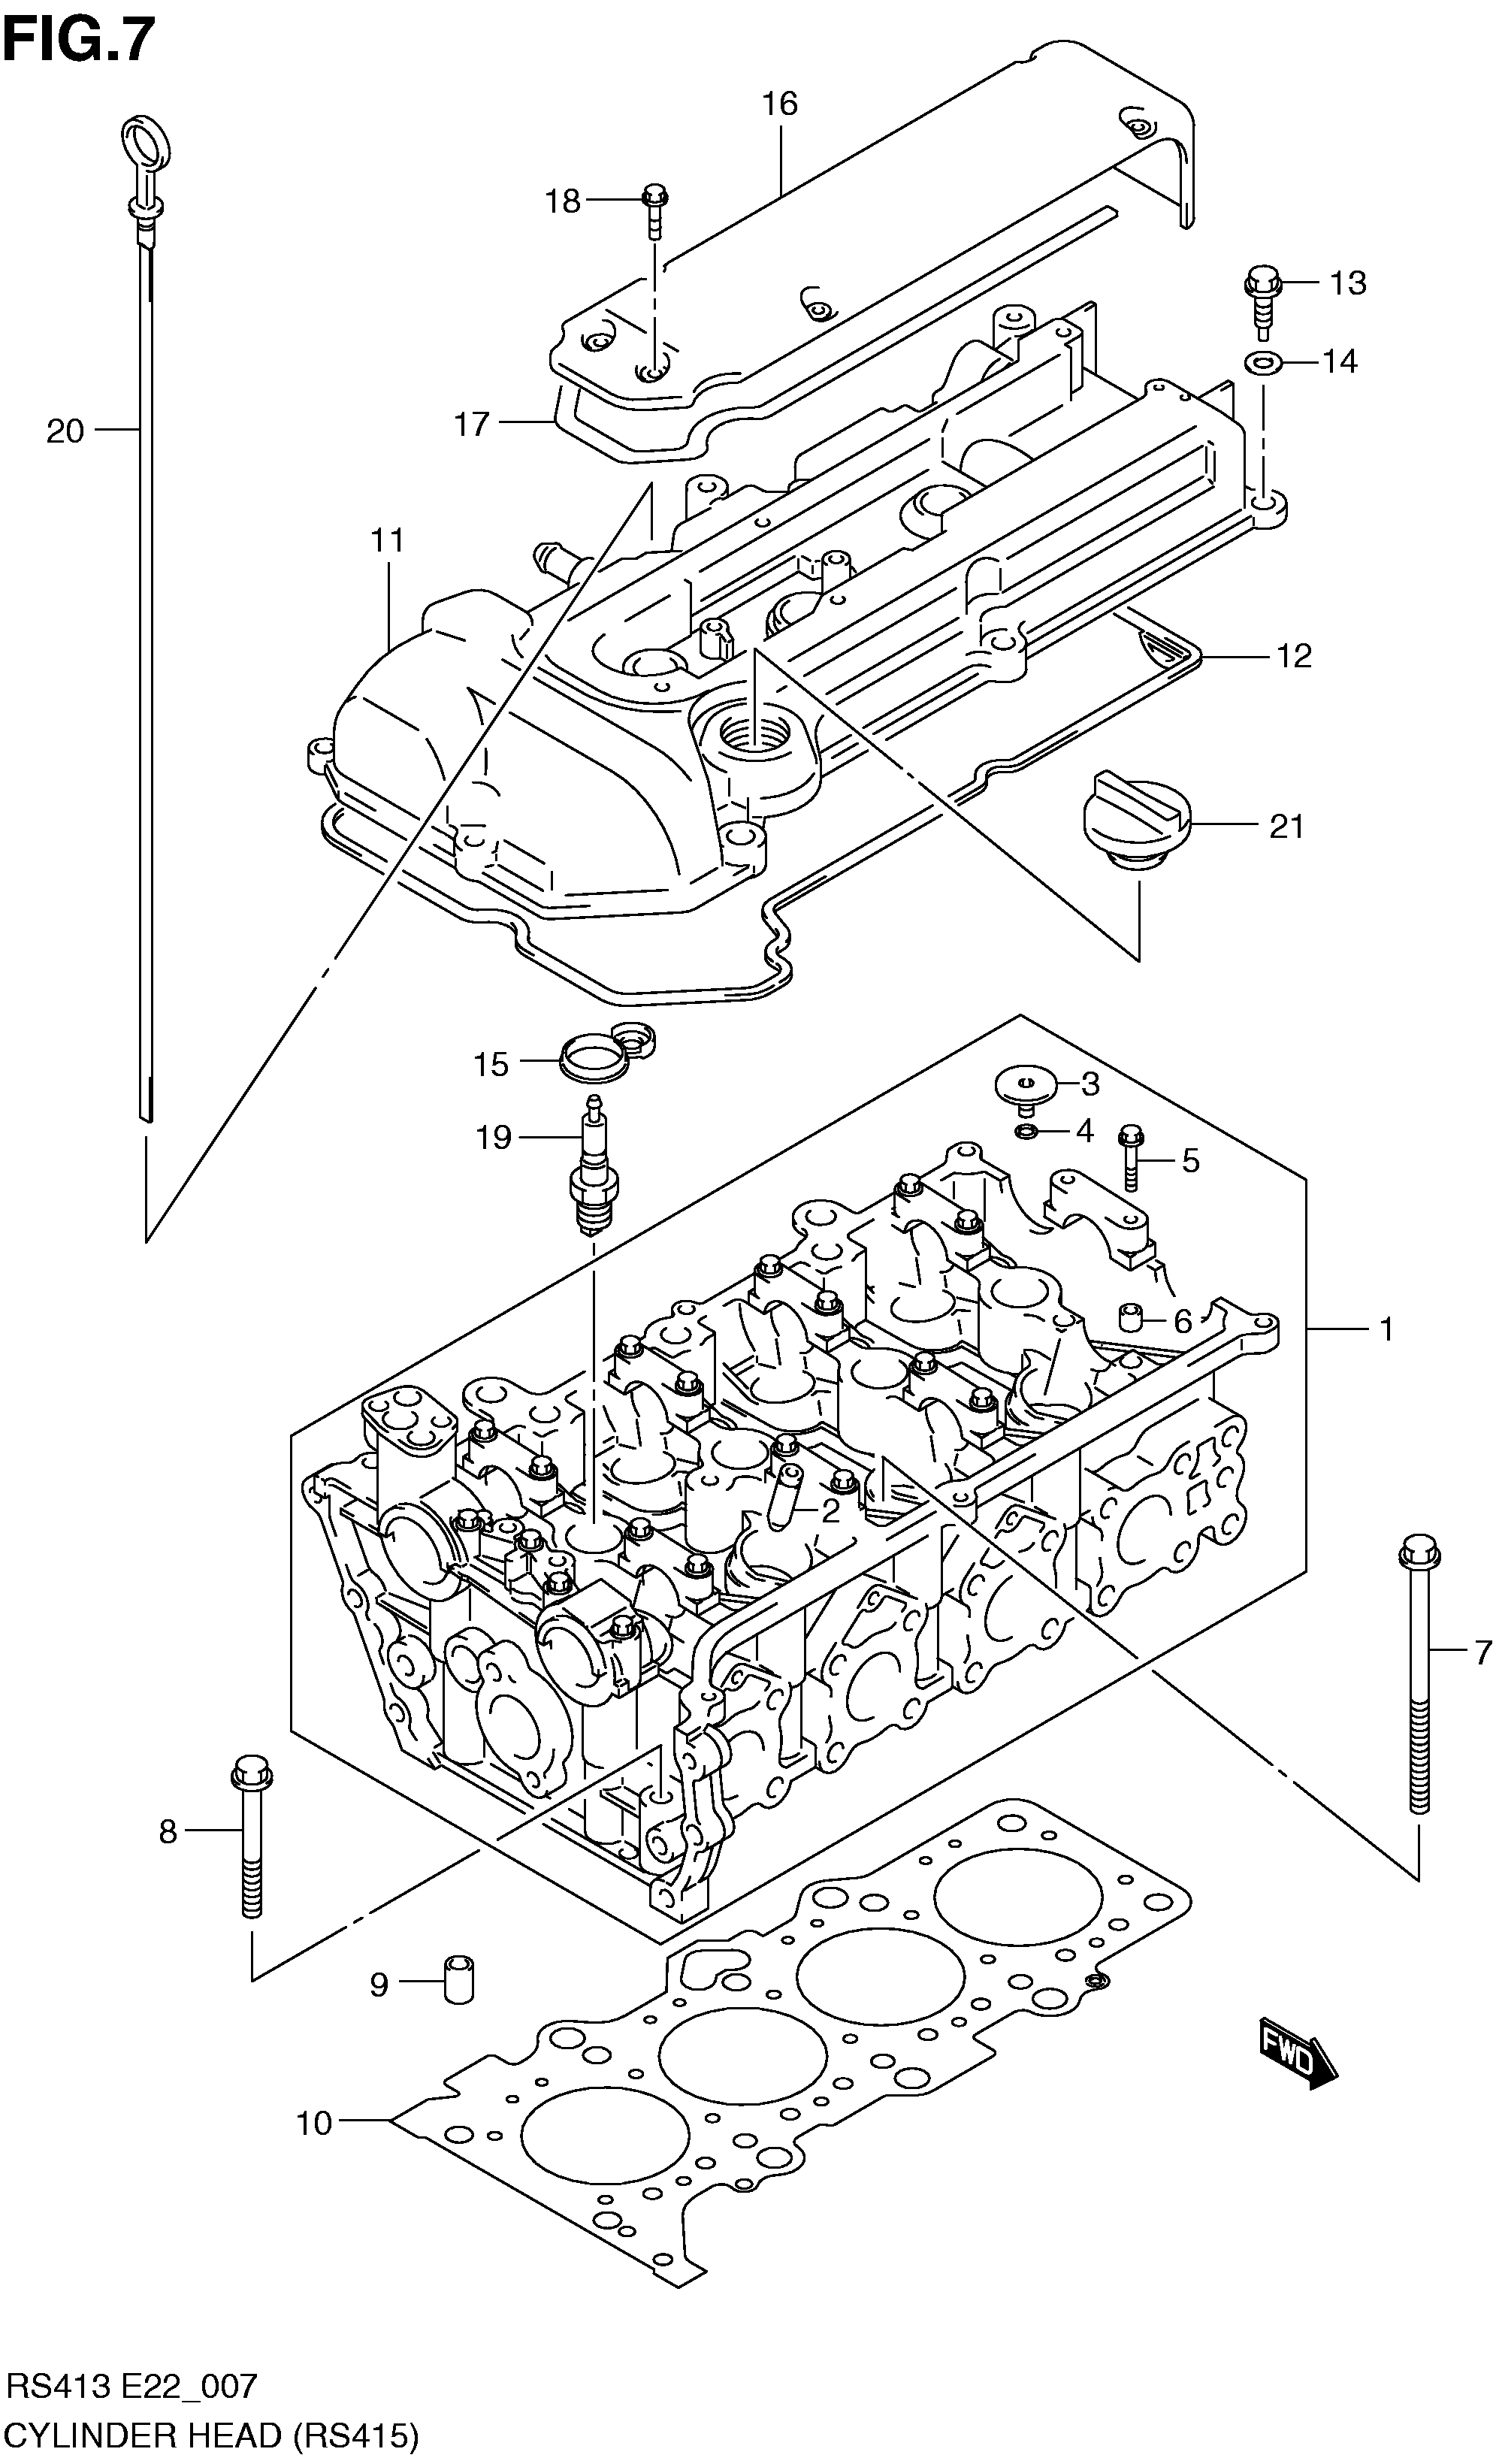 CYLINDER HEAD (RS415)